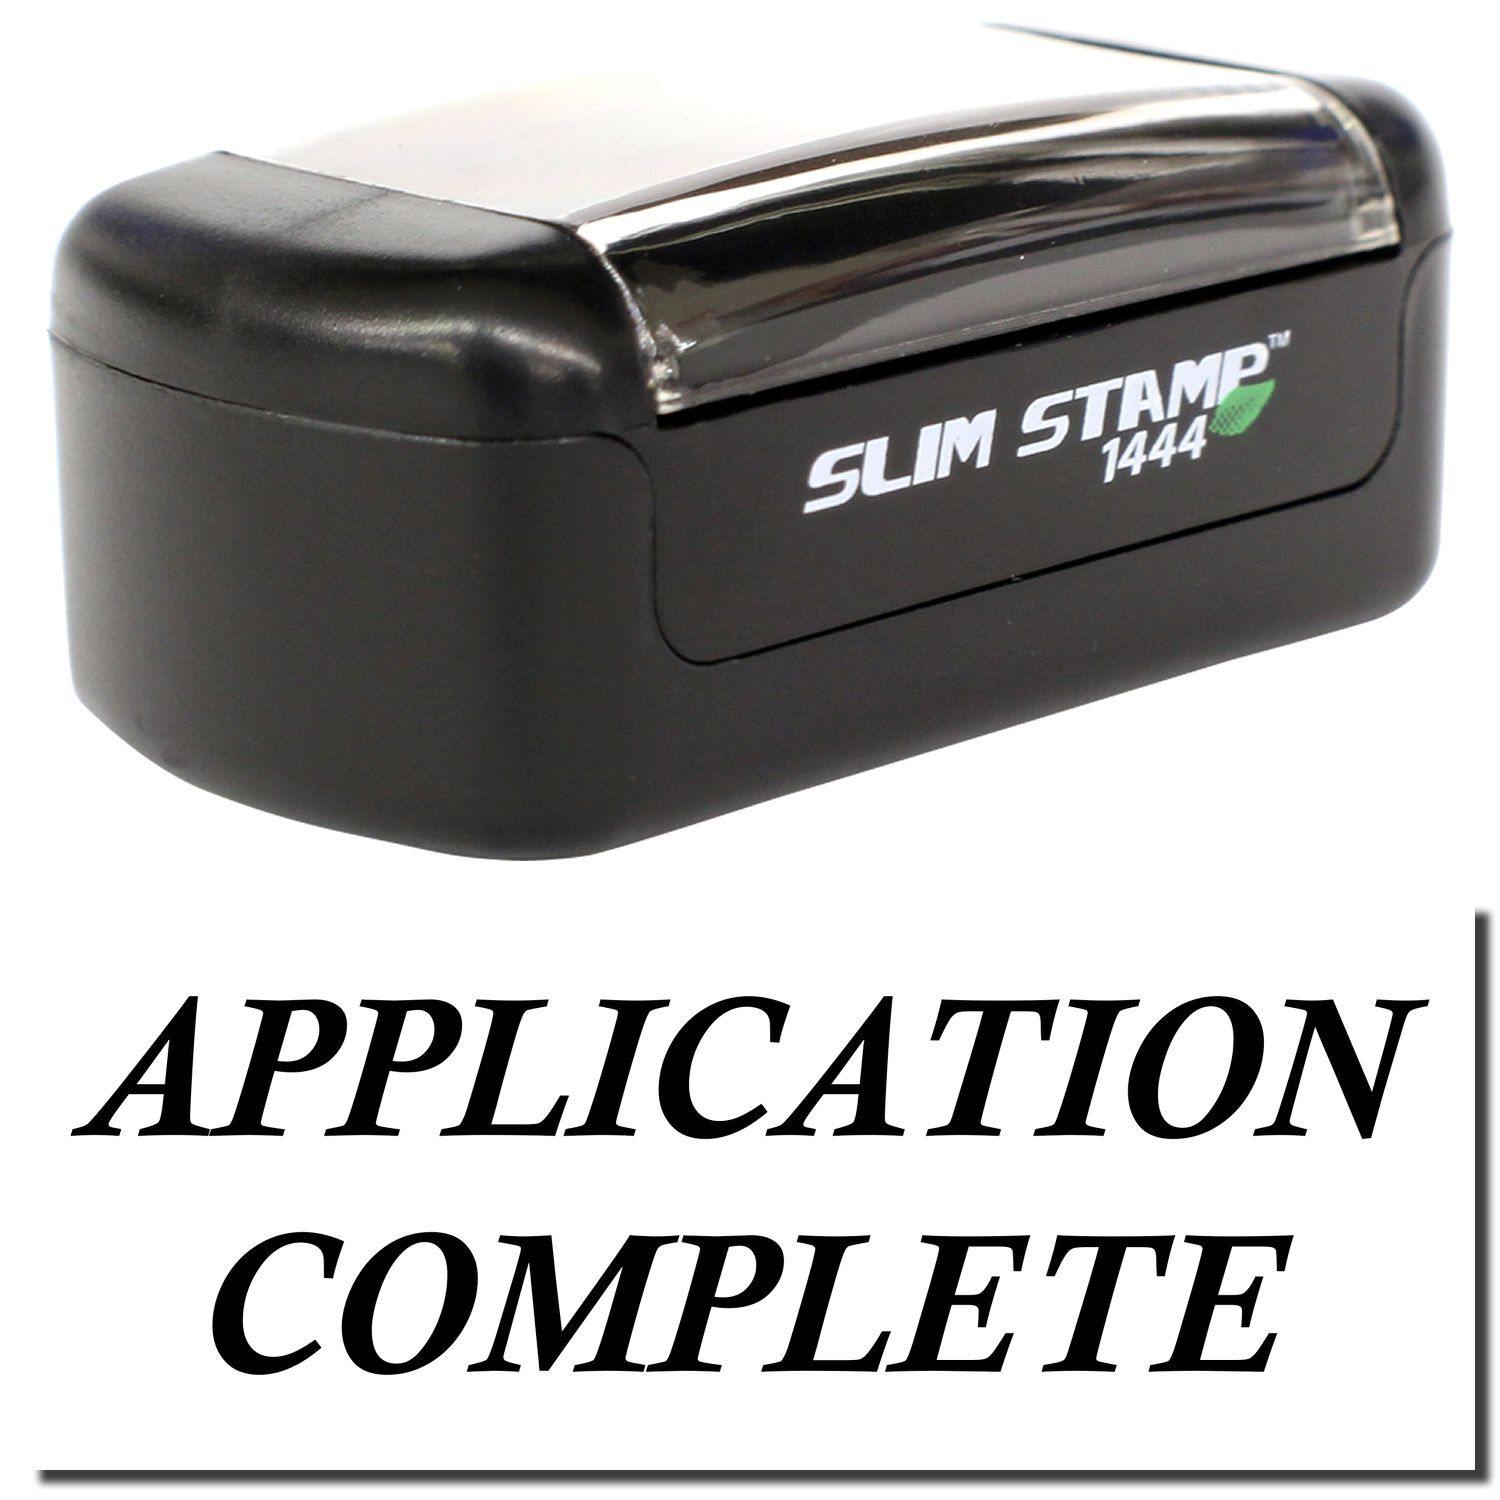 A stock office pre-inked stamp with a stamped image showing how the text "APPLICATION COMPLETE" is displayed after stamping.